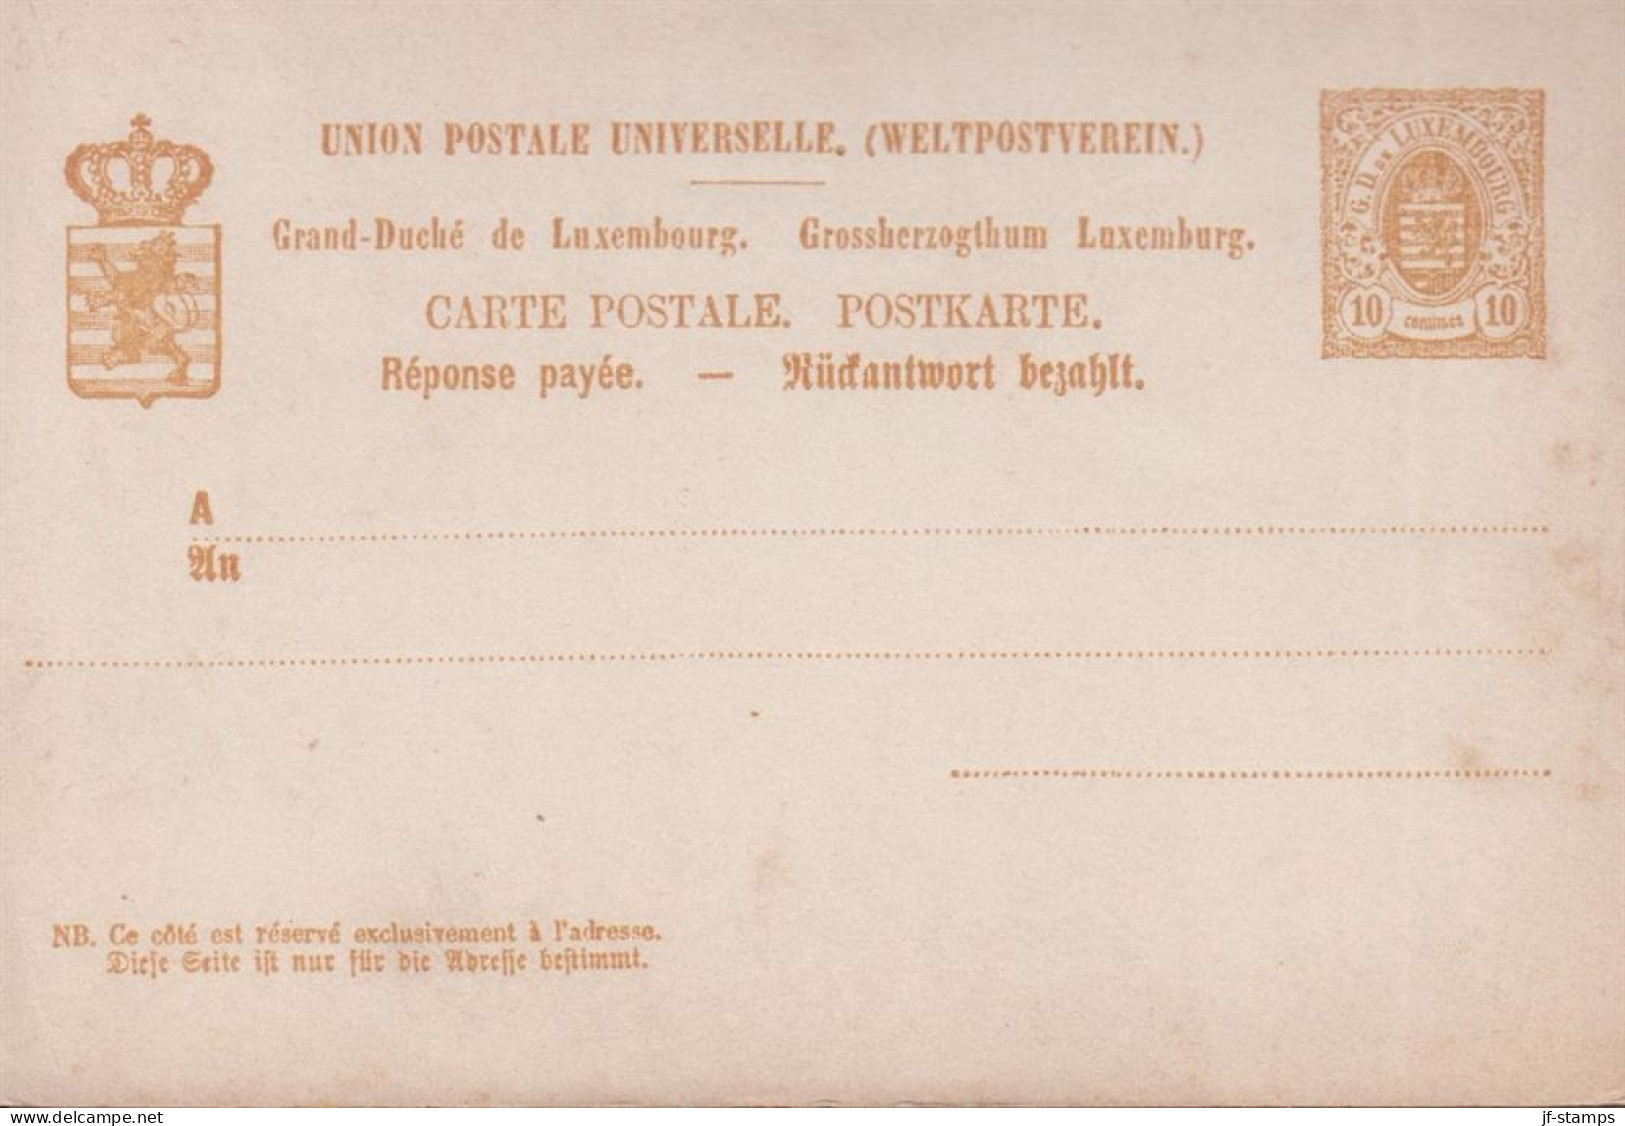 1879. LUXEMBOURG. CARTE POSTALE. 10 Centimes Double Card With Response Payee. - JF445177 - Postwaardestukken